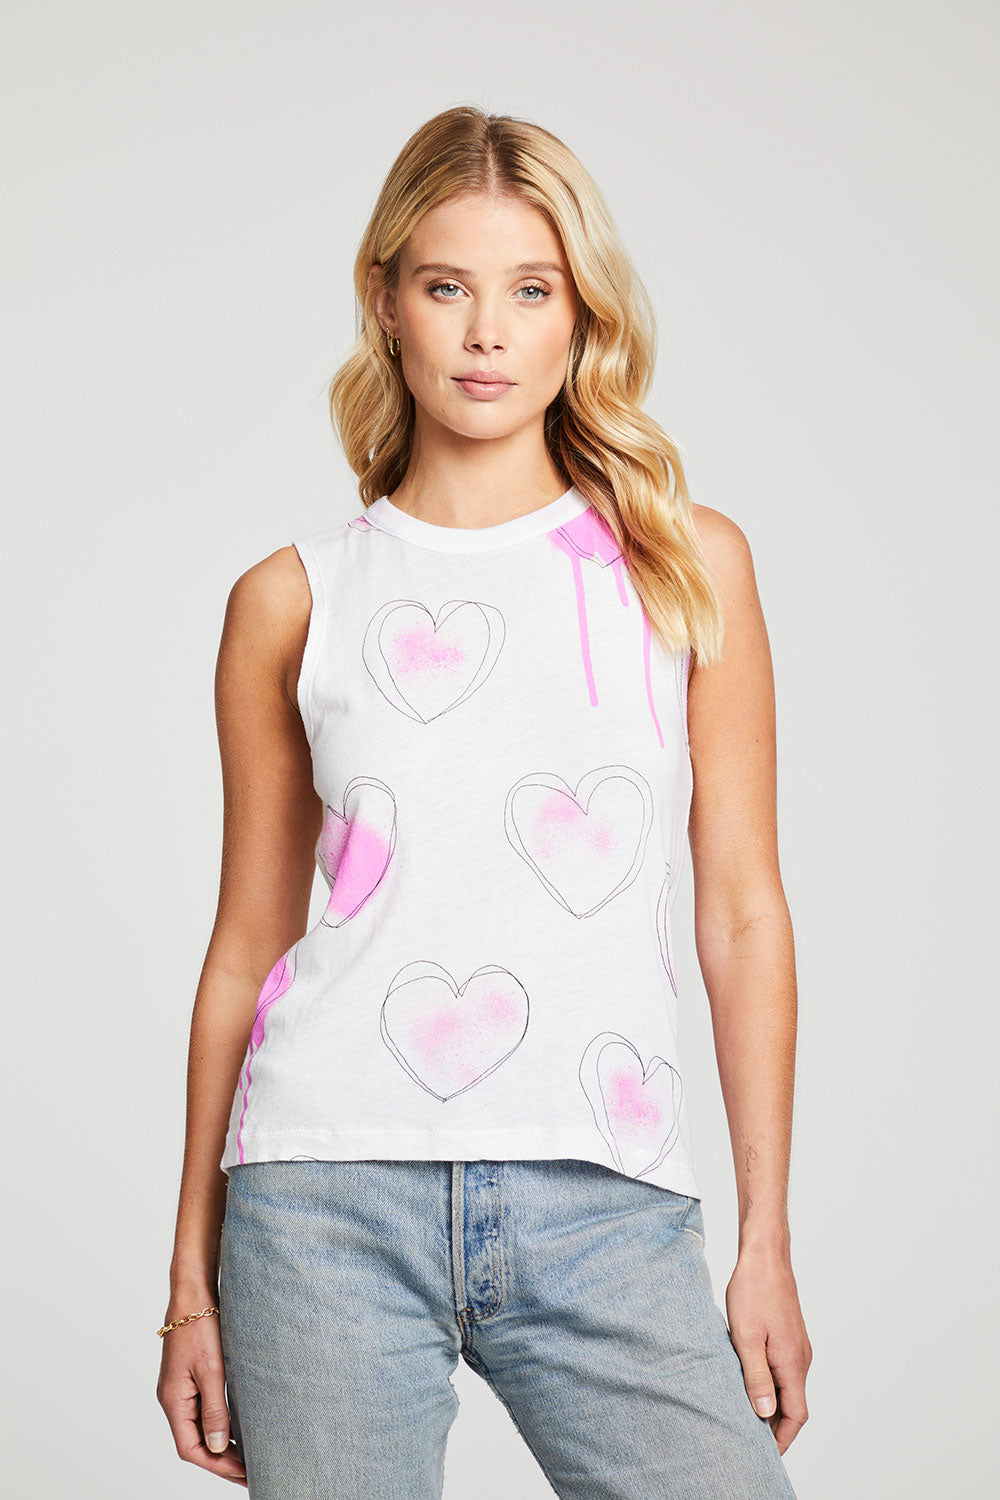 Hand Drawn Hearts WOMENS chaserbrand